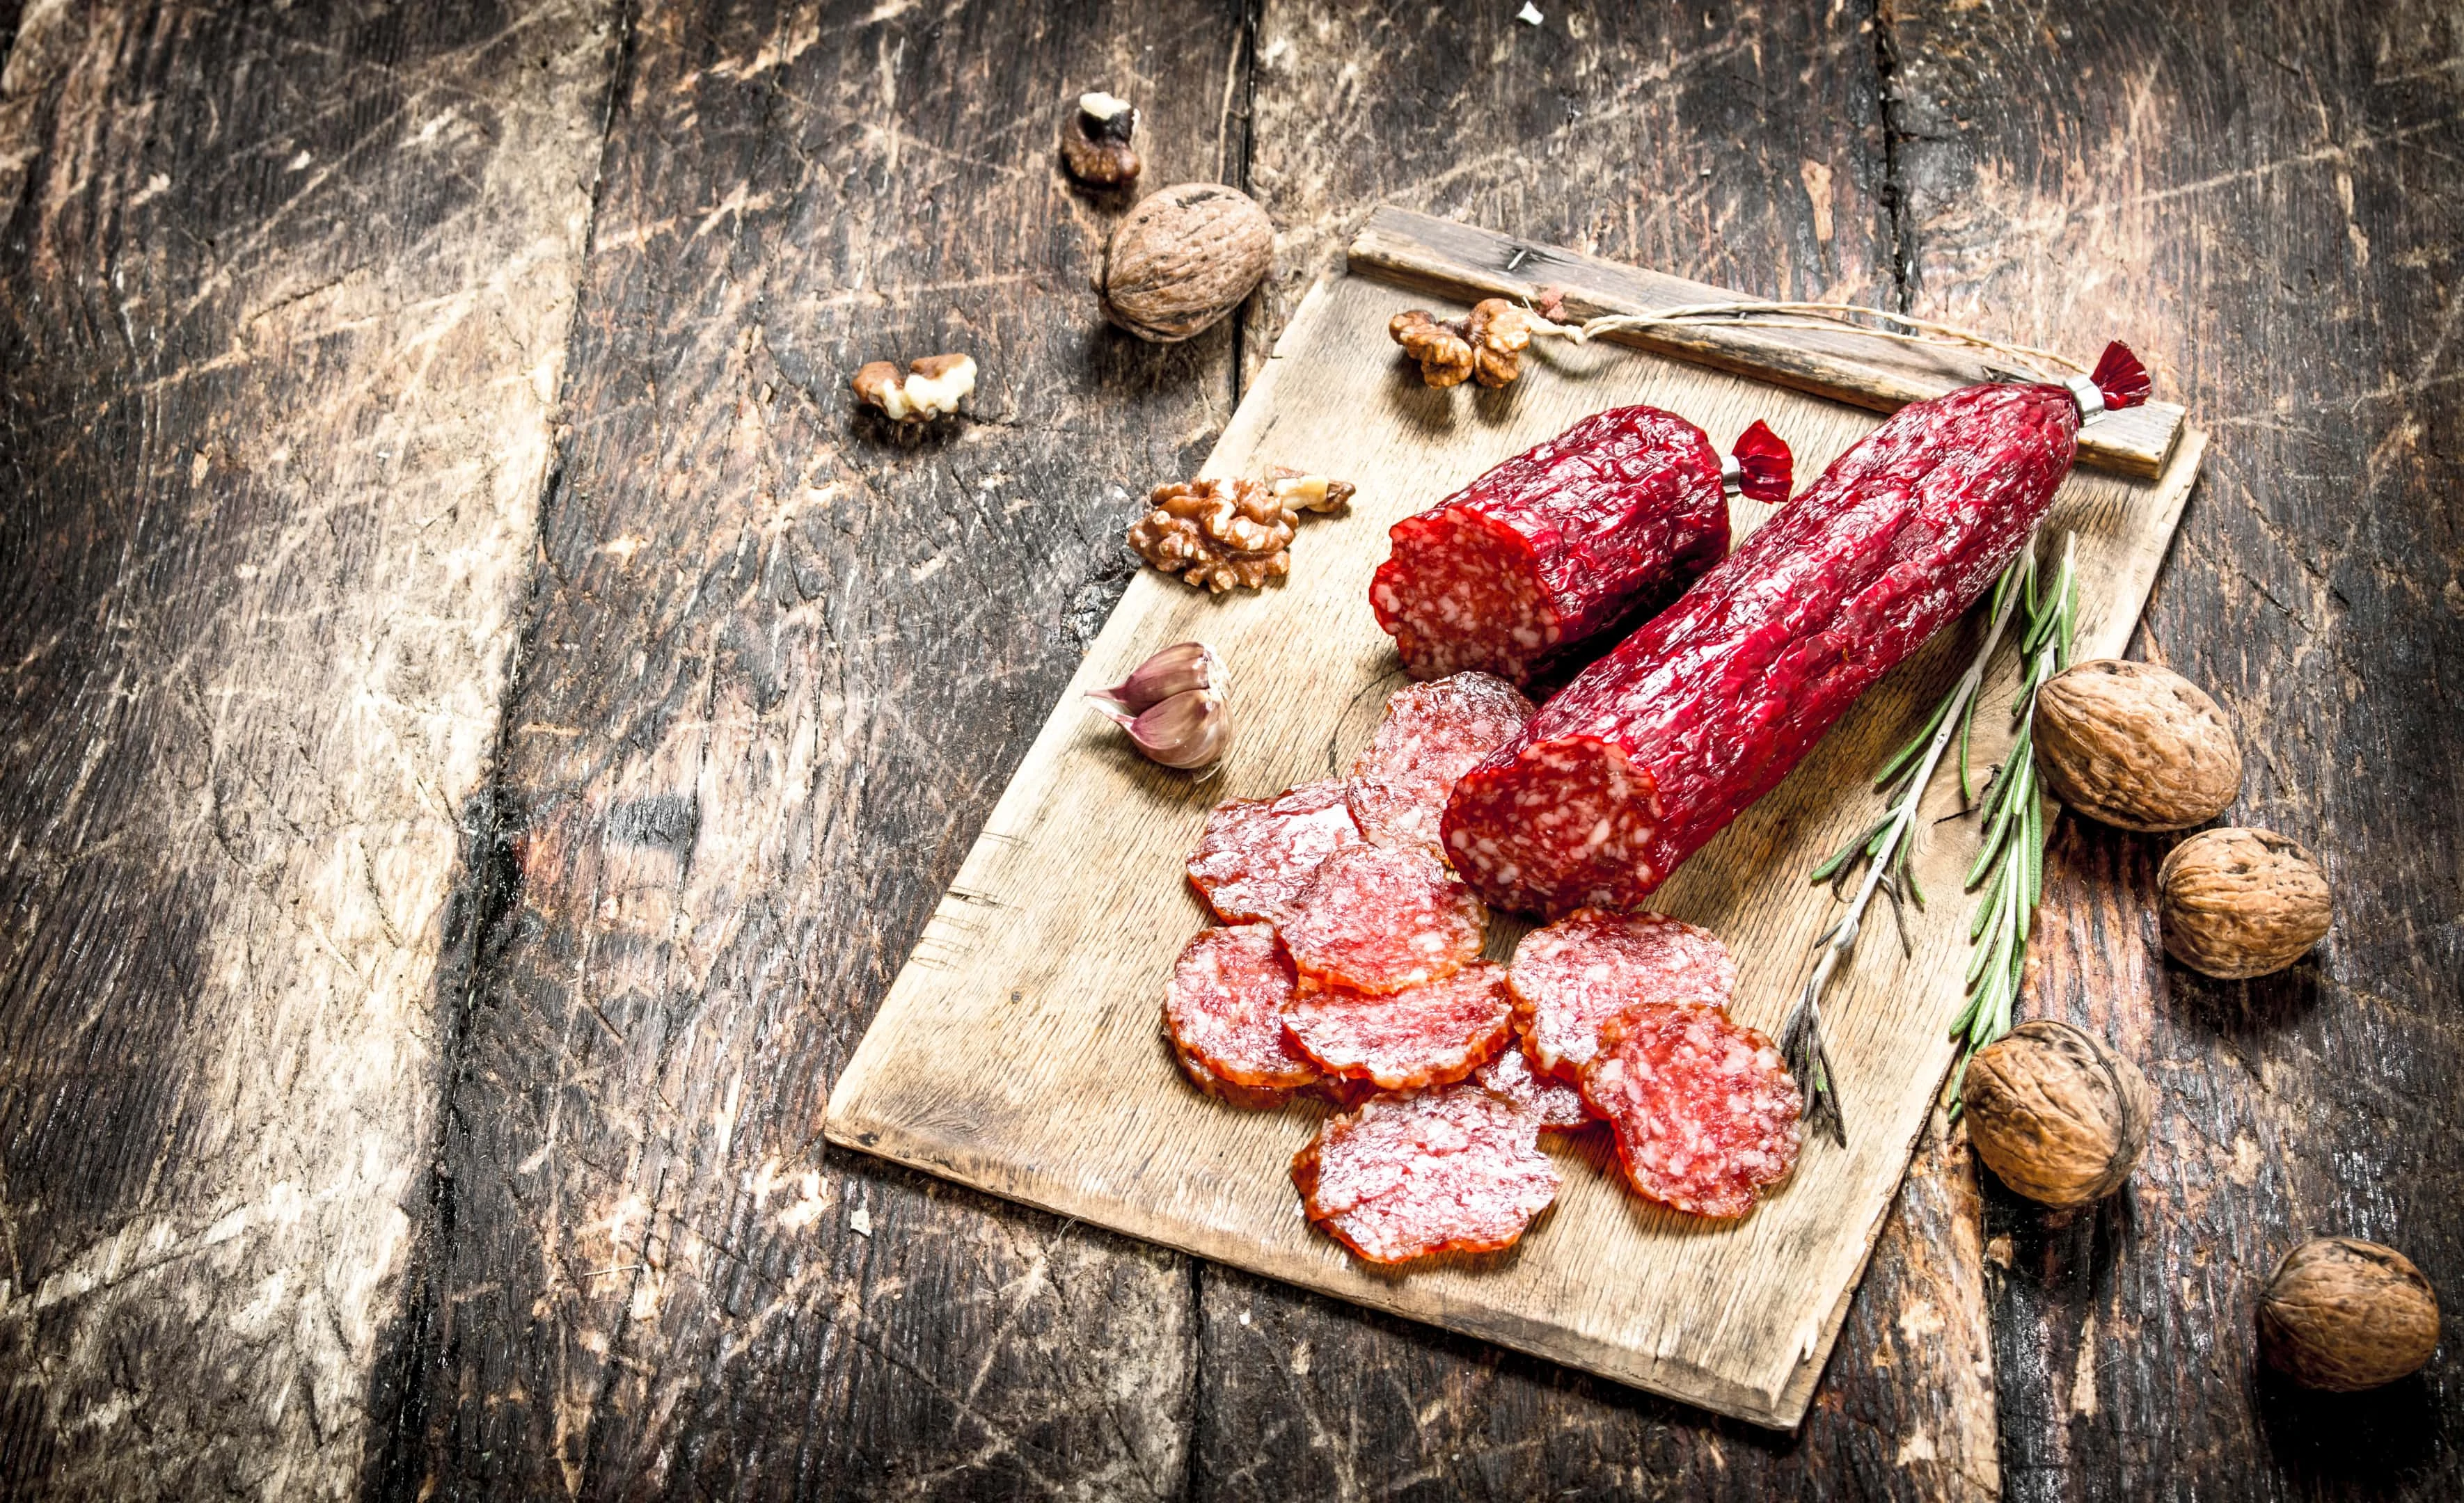 Salami is also on the list of foods to avoid with bile duct cancer